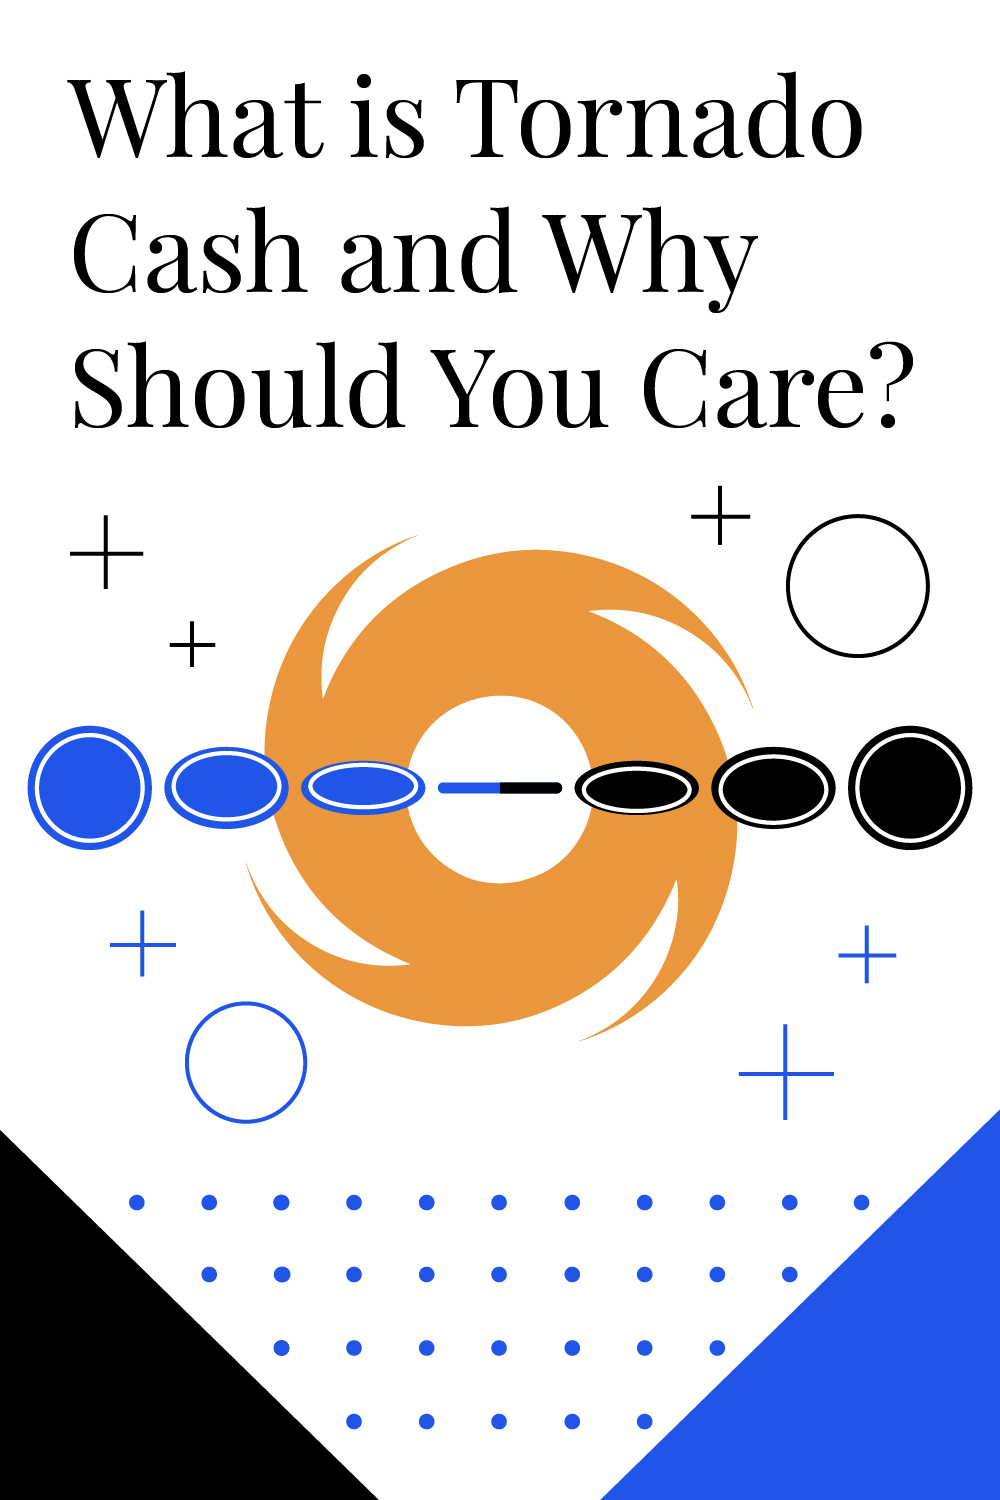 What Is Tornado Cash And Why Should You Care?